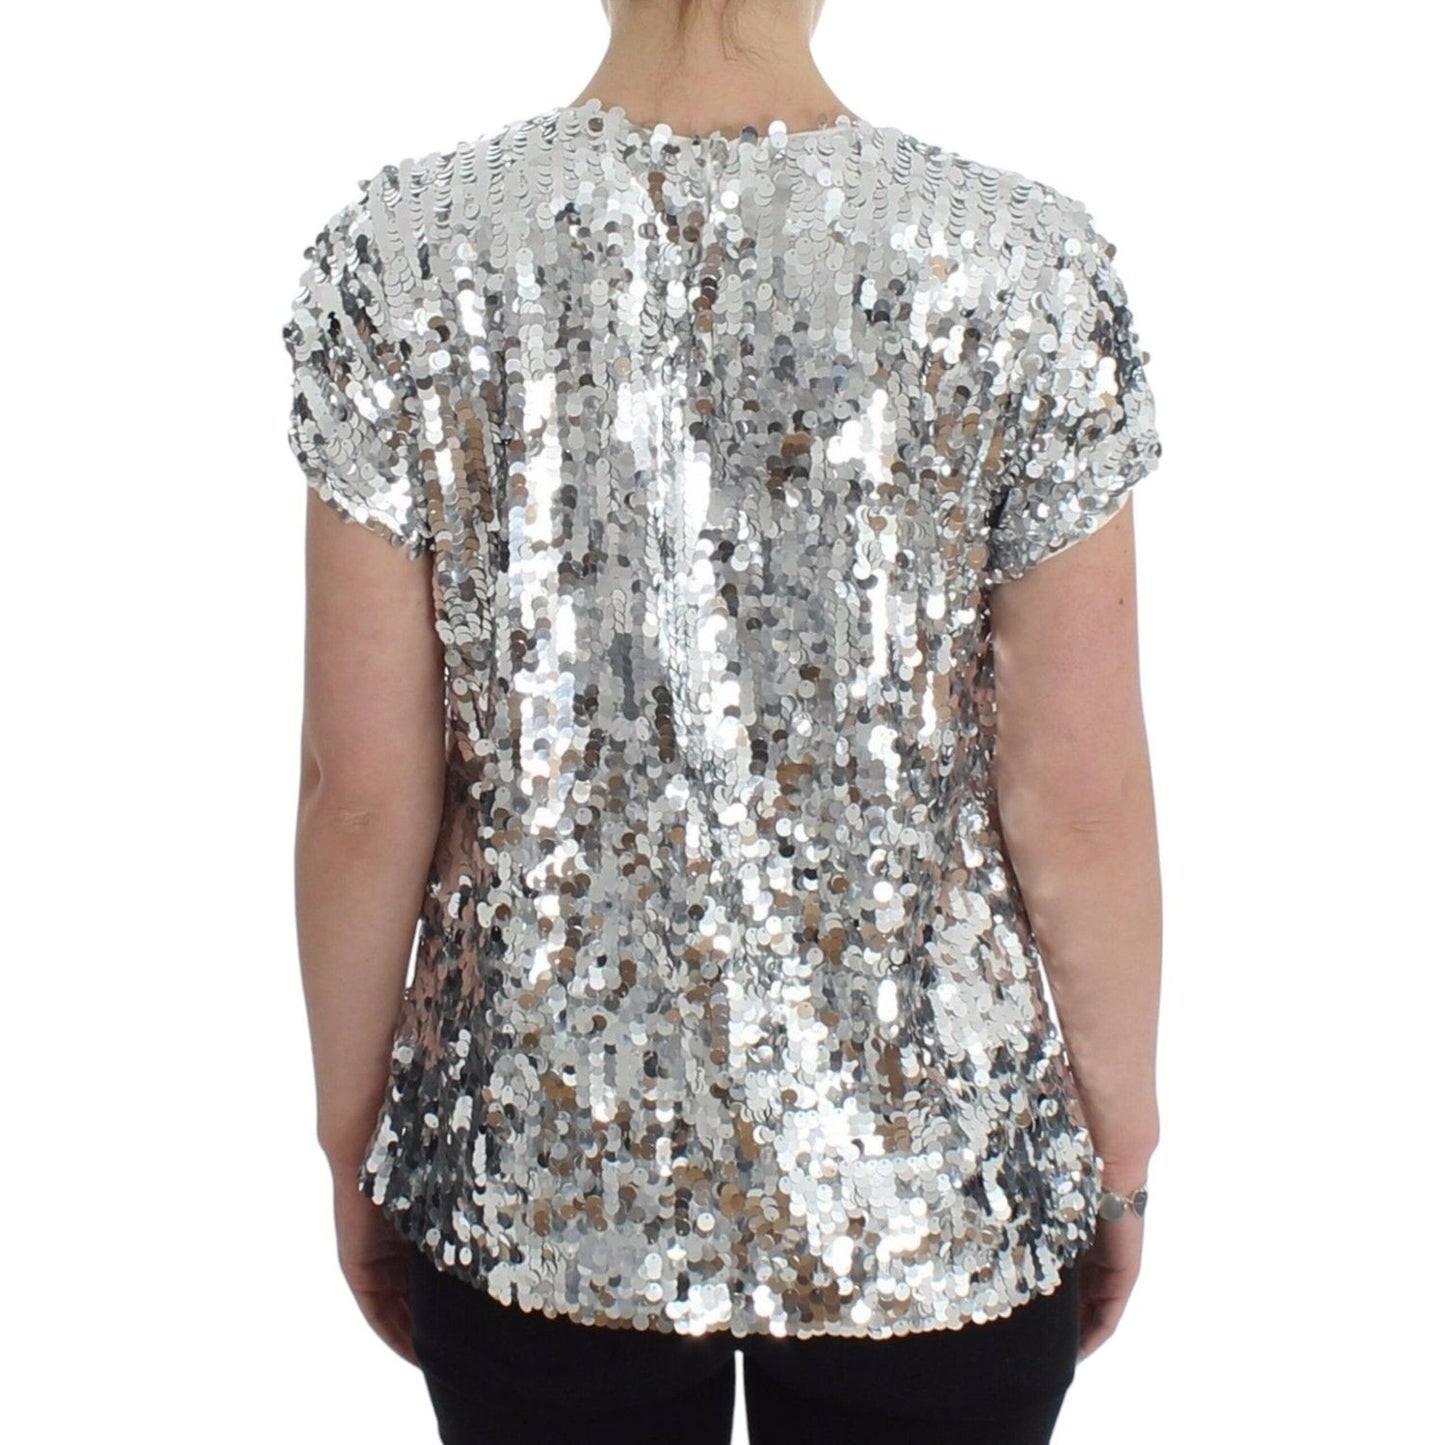 Dolce & Gabbana Enchanted Sicily Sequined Evening Blouse silver-sequined-crewneck-blouse-t-shirt-top